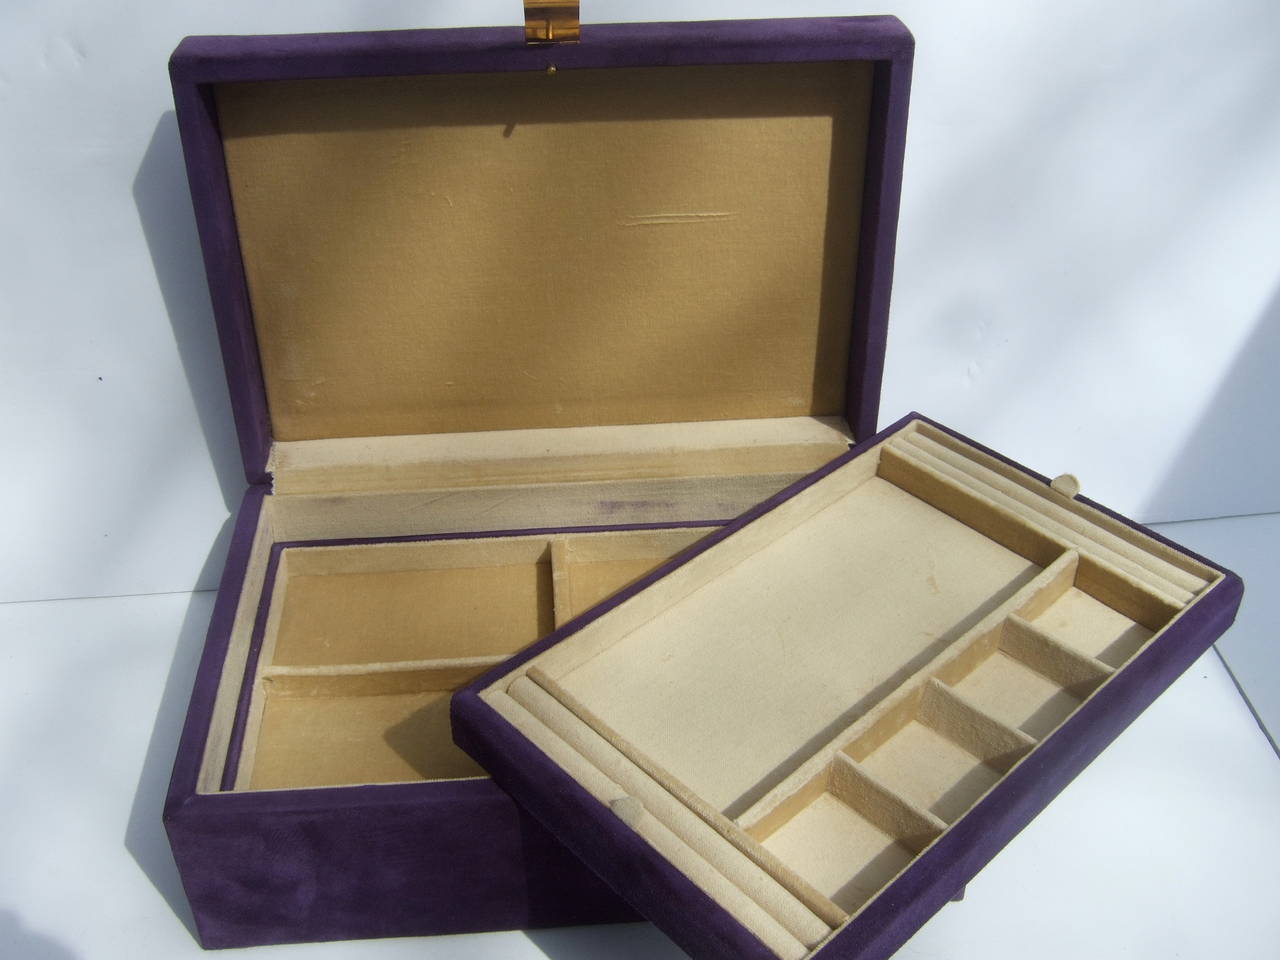 Neiman Marcus Set of Violet Suede Jewelry Boxes Made in Italy 1